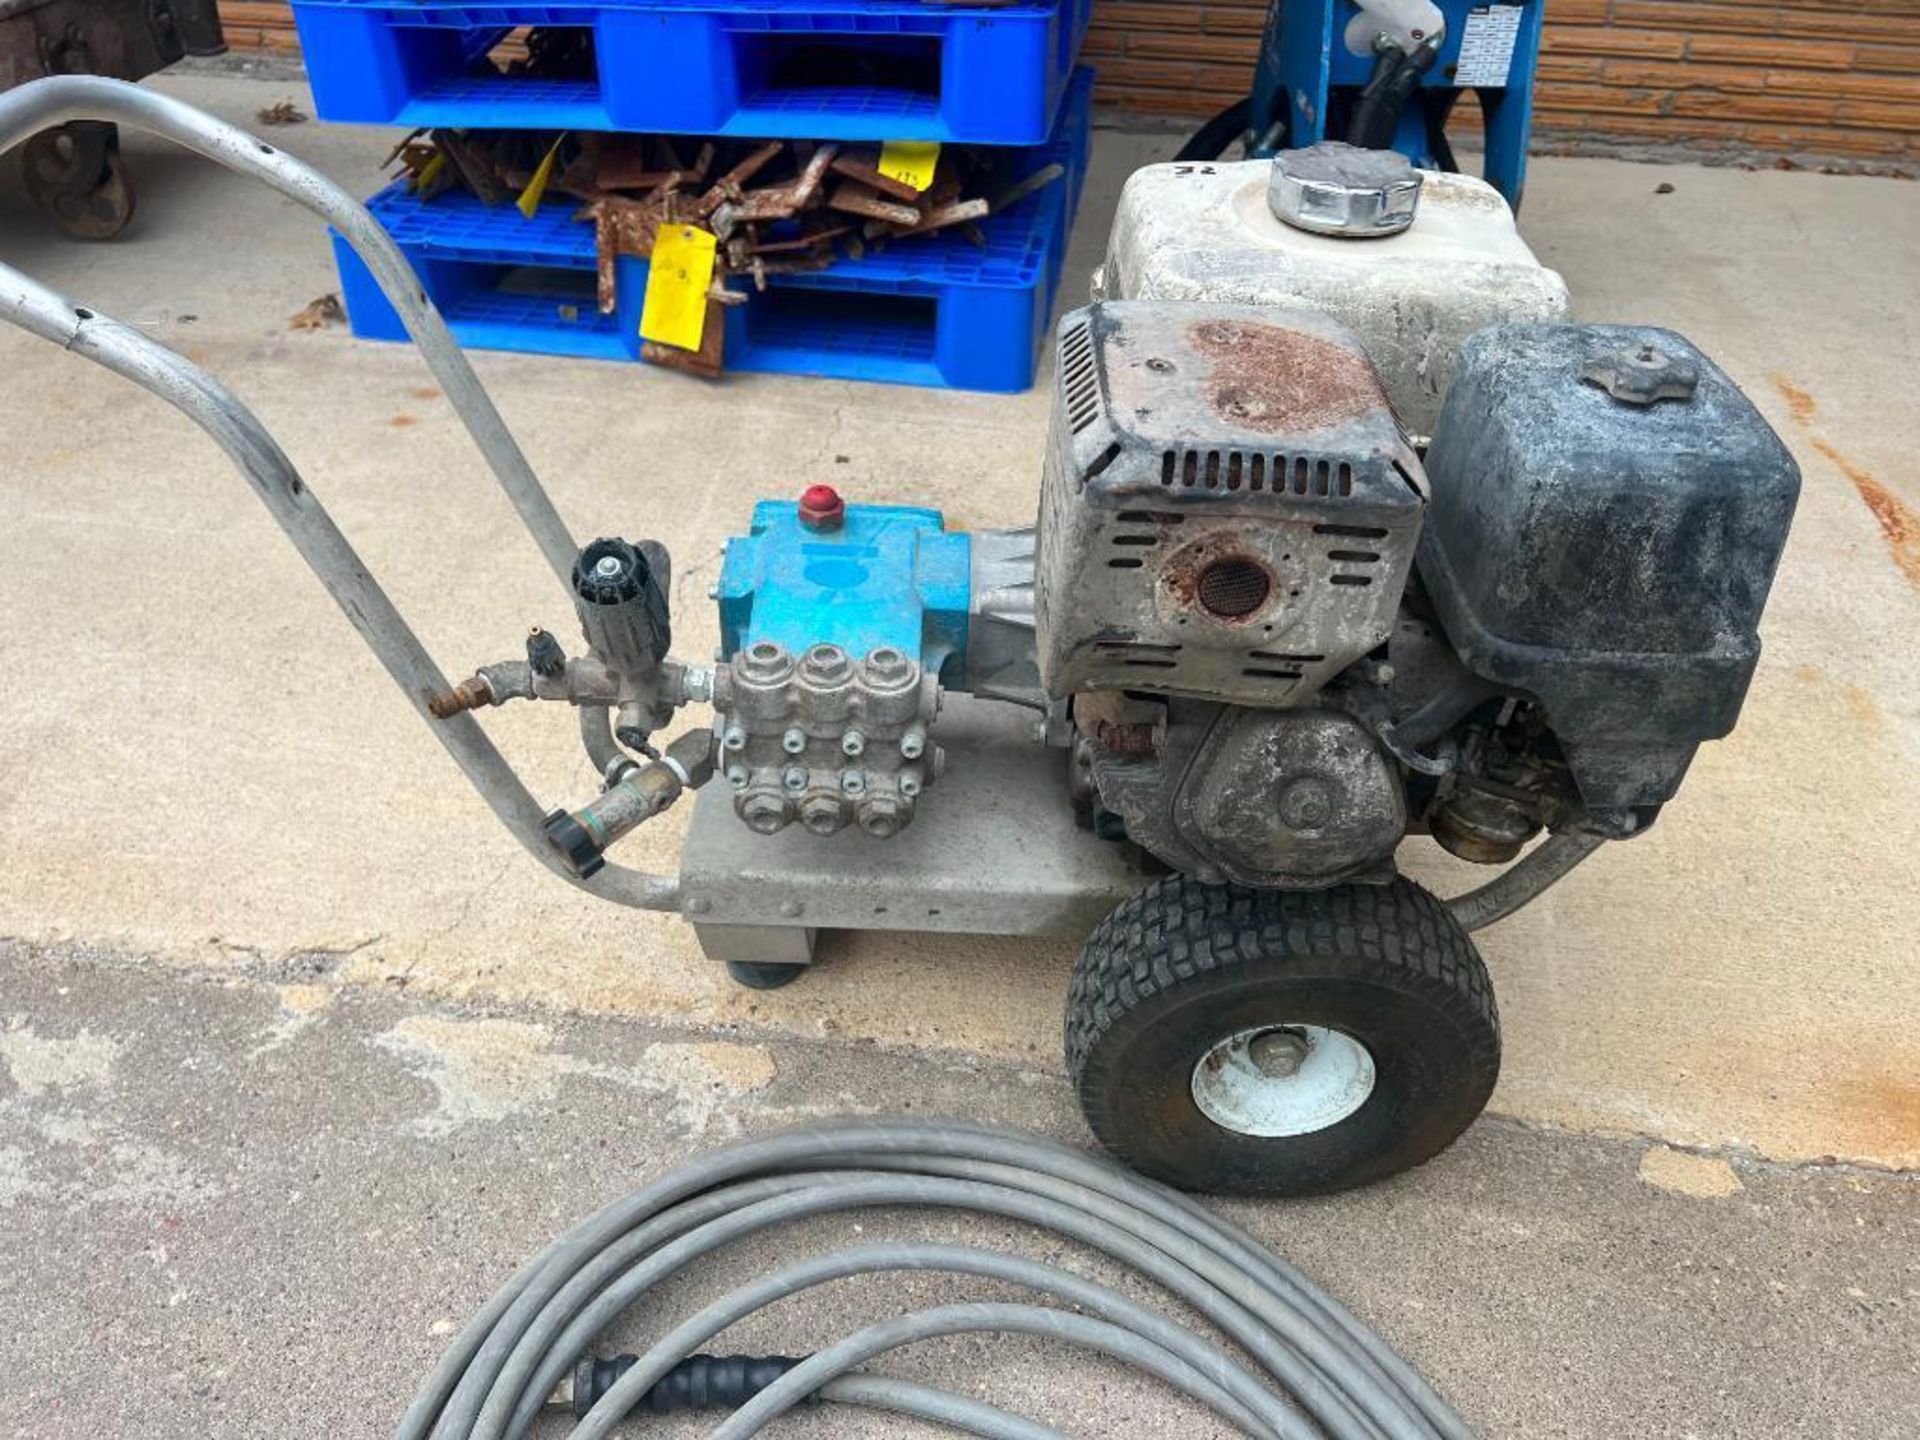 Honda Pressure Washer with Hose & Wand. Located in Mt. Pleasant, IA - Image 8 of 8